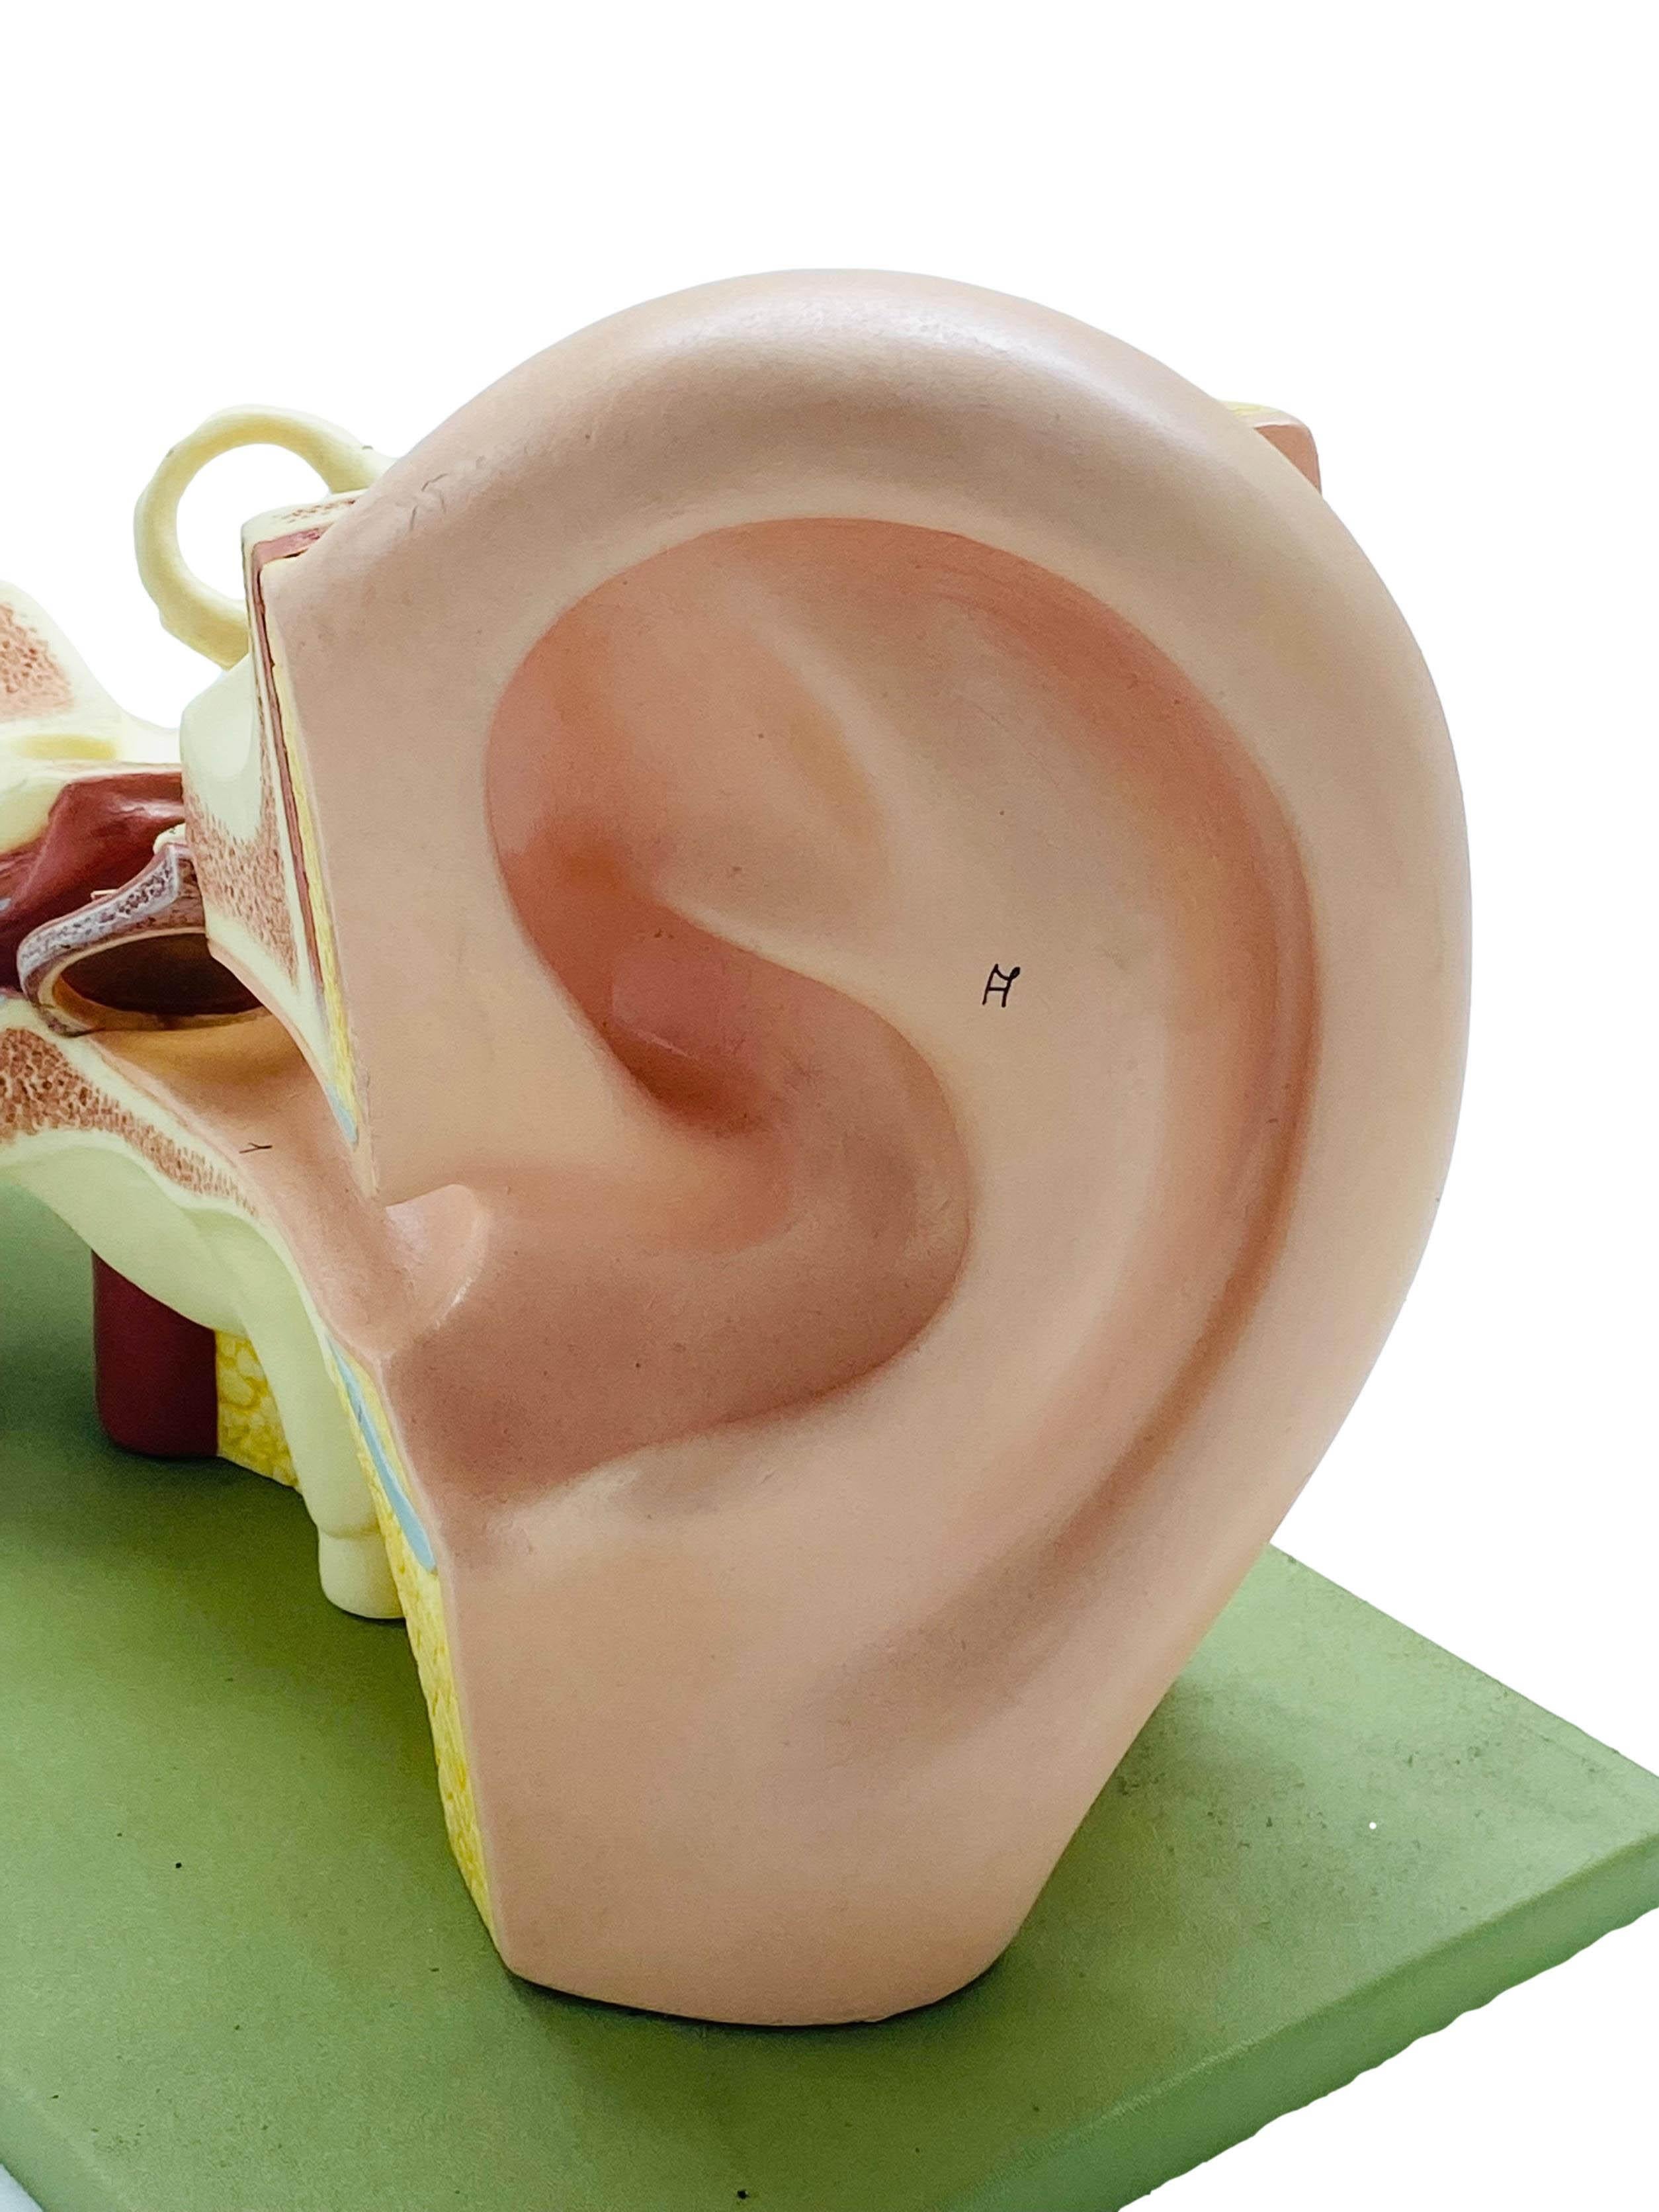 German Anatomical Model of the Human Ear by Somso, 1950s For Sale